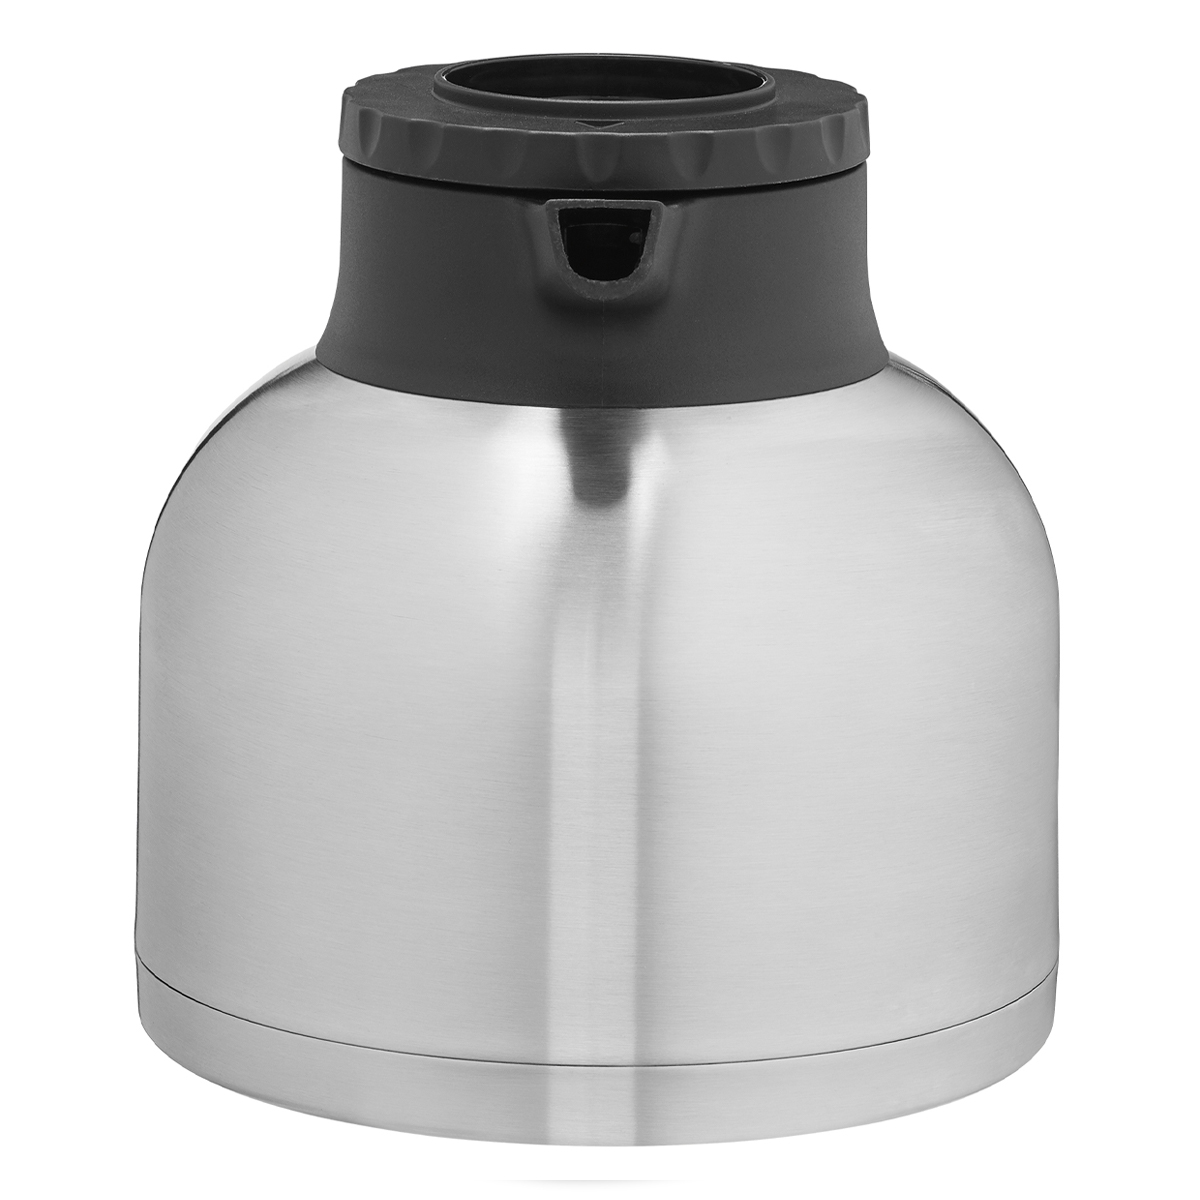 https://www.waringcommercialproducts.com/files/products/wtc64-waring-thermal-carafe-inset-1-1200x1200.jpg